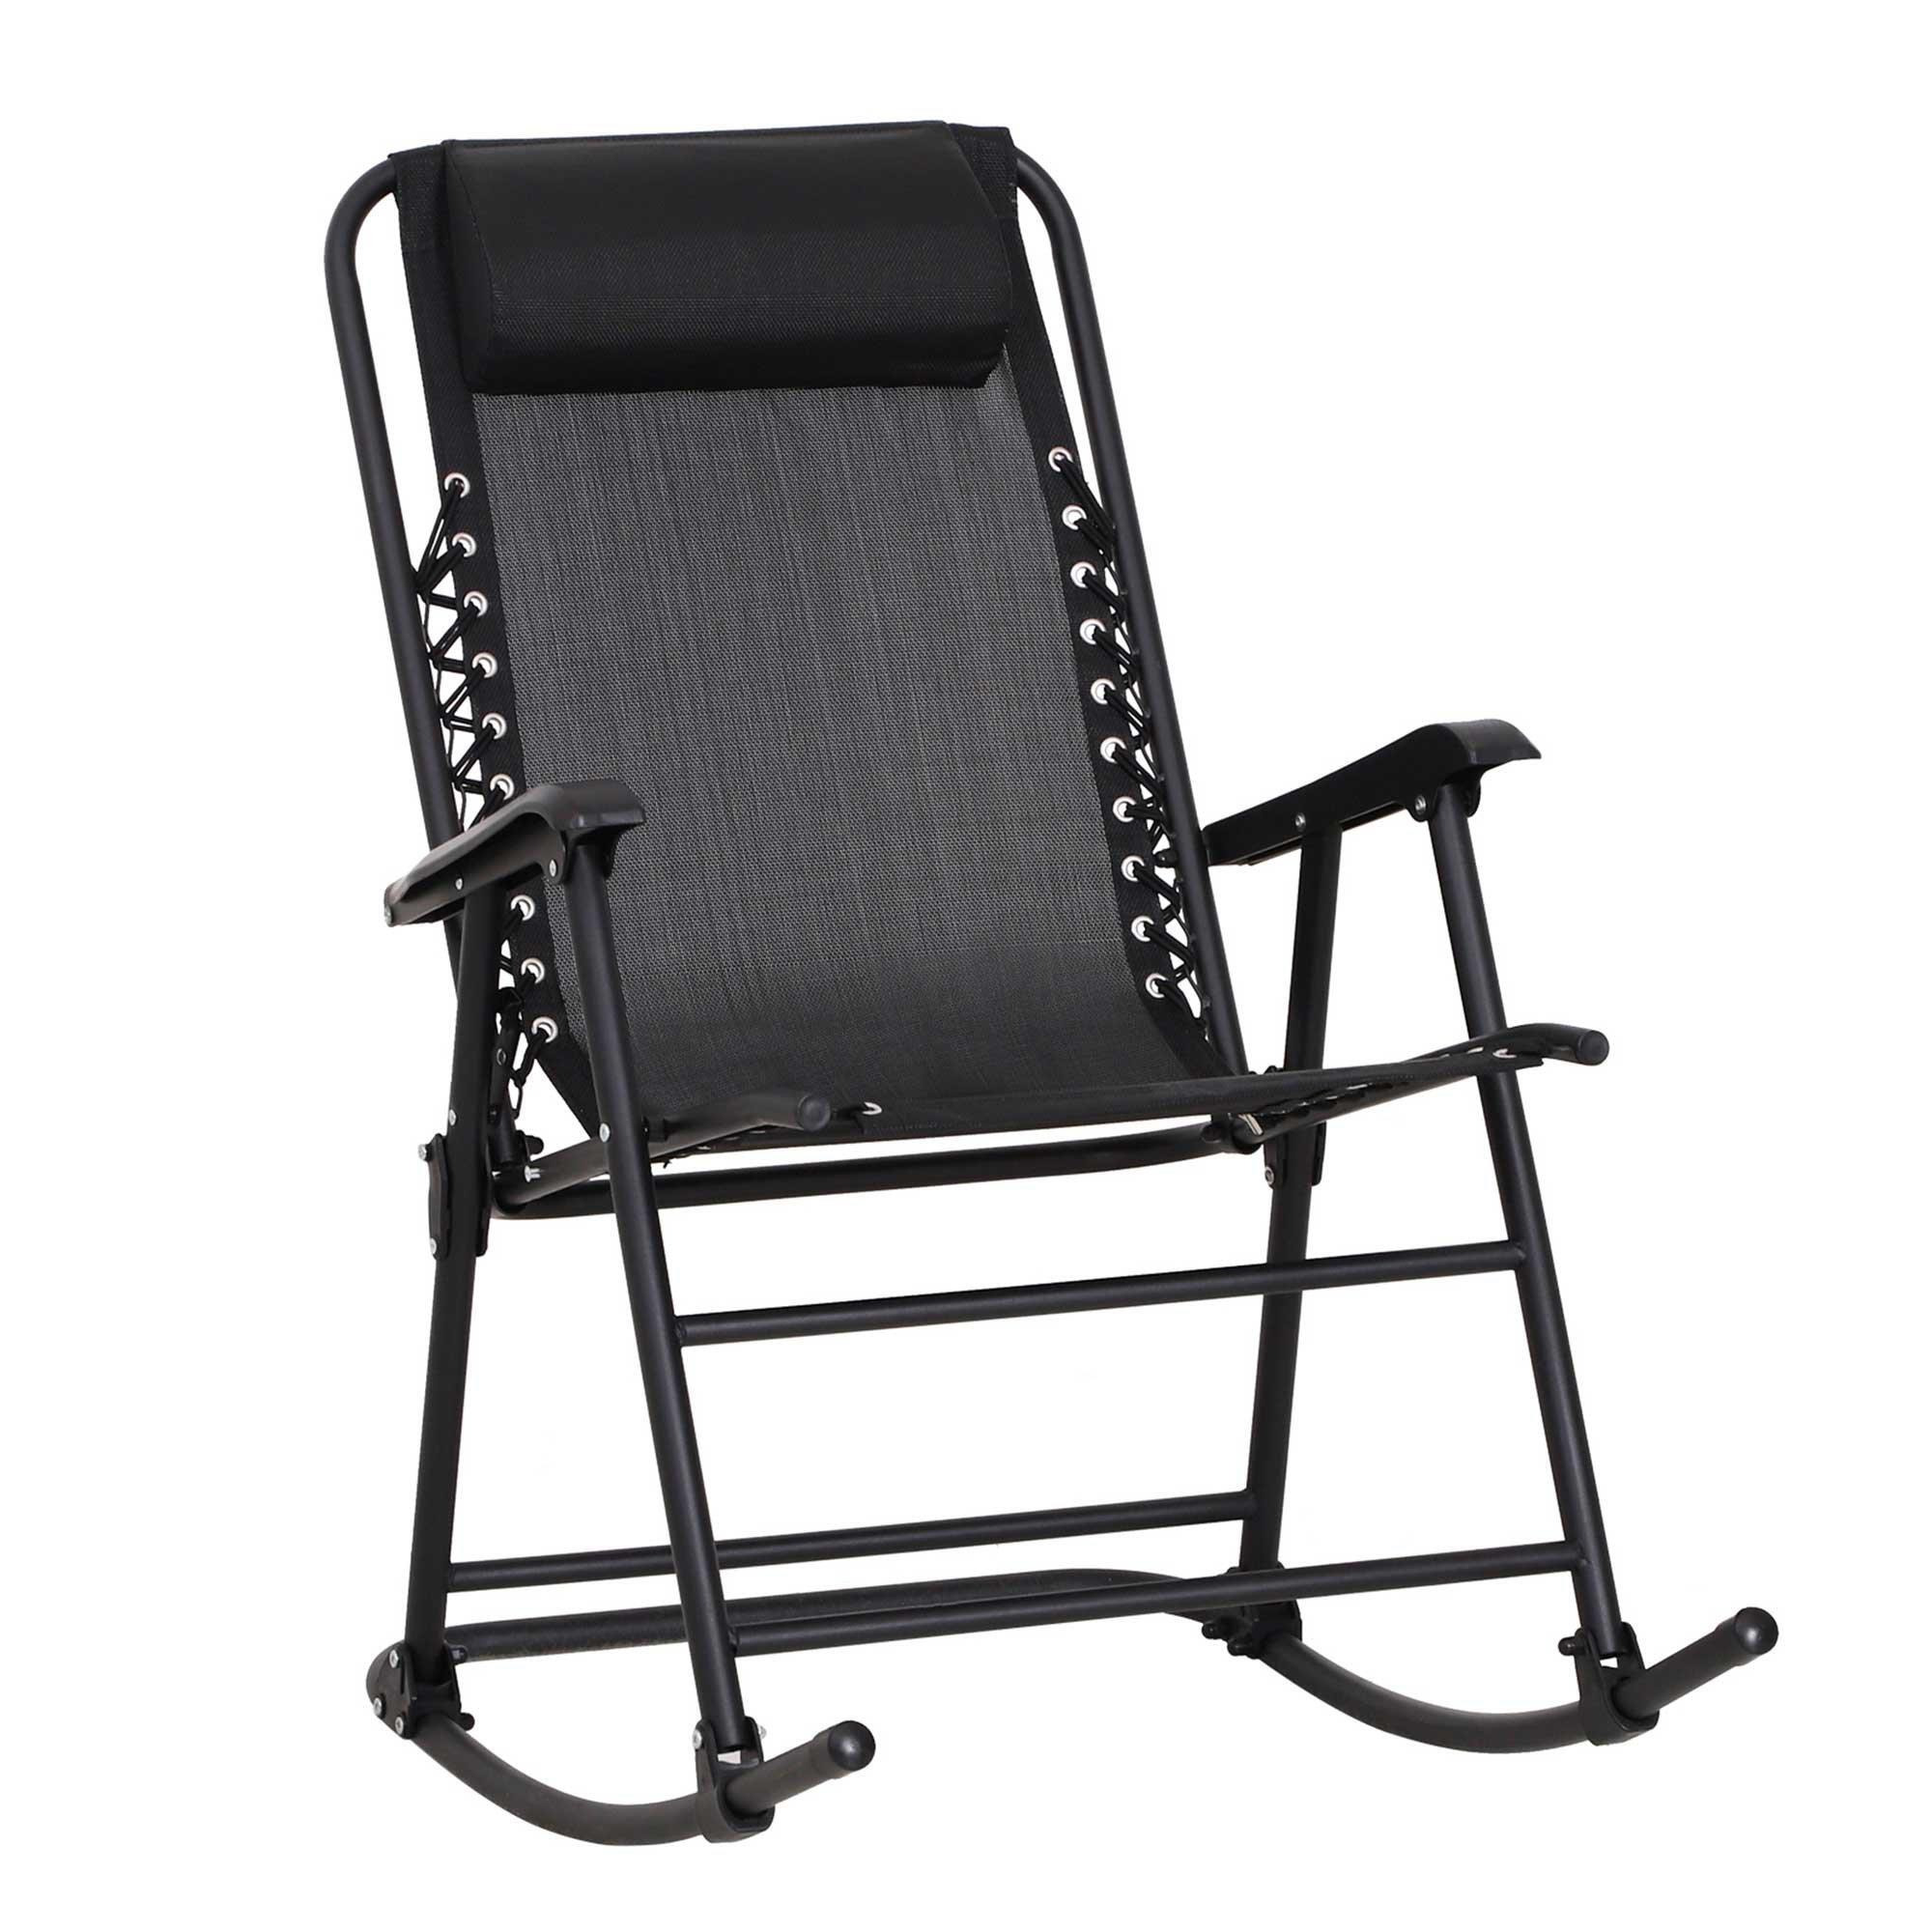 Folding Rocking Chair Outdoor Portable Zero Gravity Chair - image 1